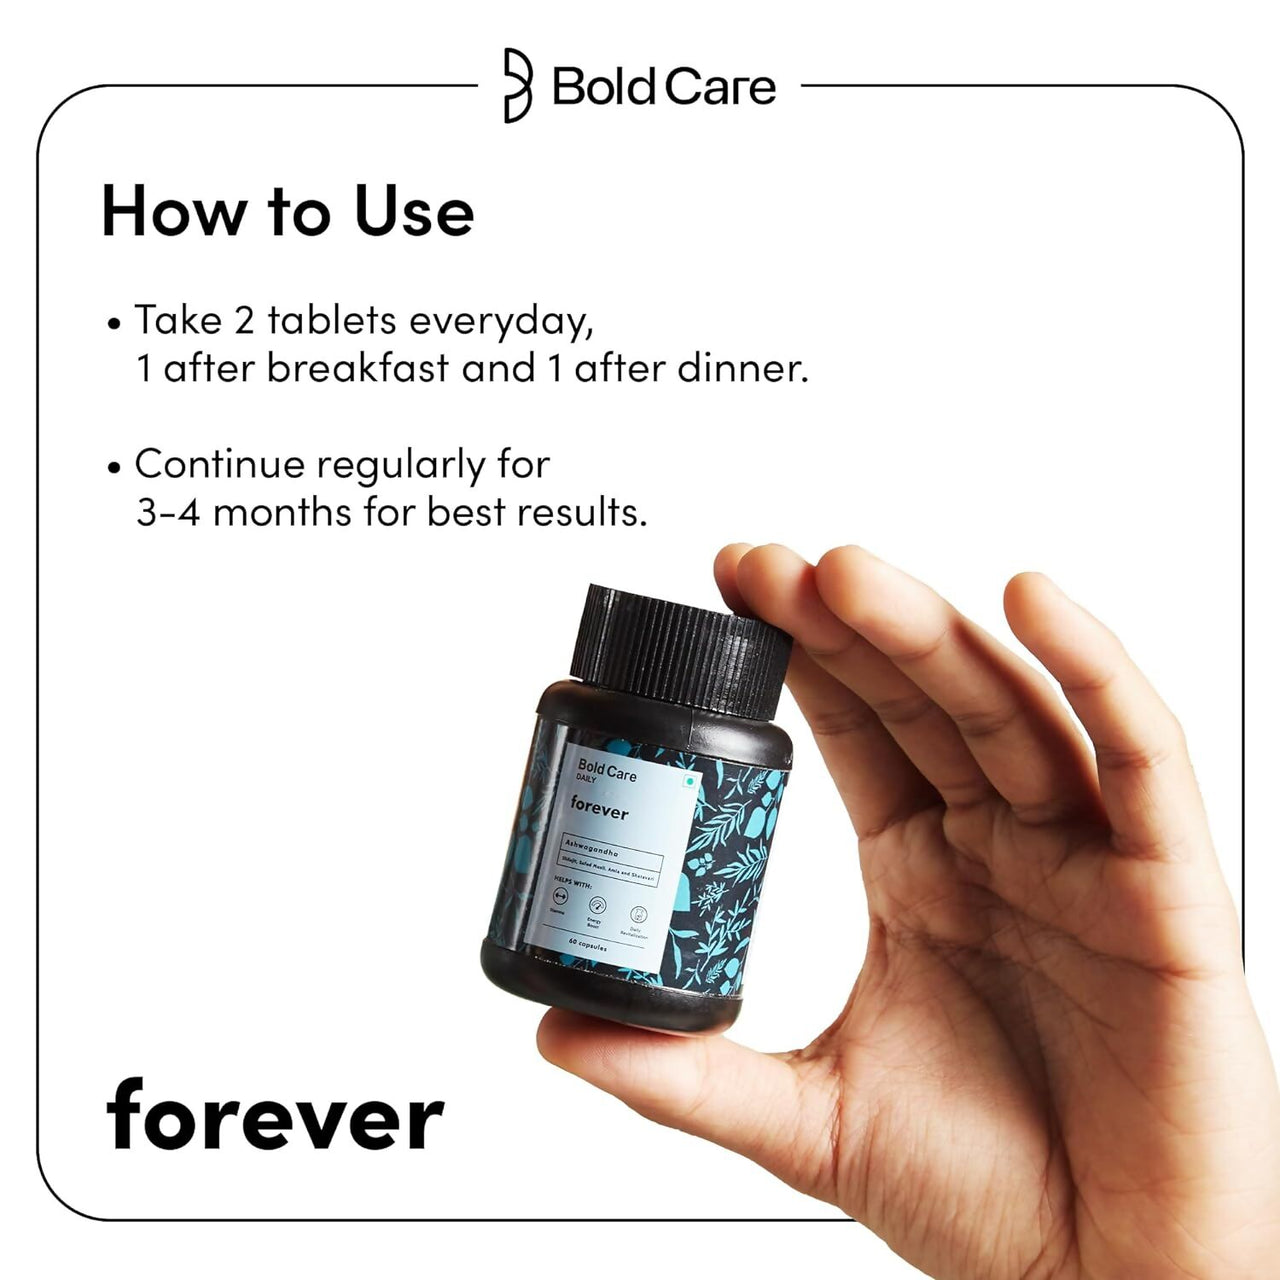 Bold Care Forever - Natural Stamina Supplement Capsules - Distacart